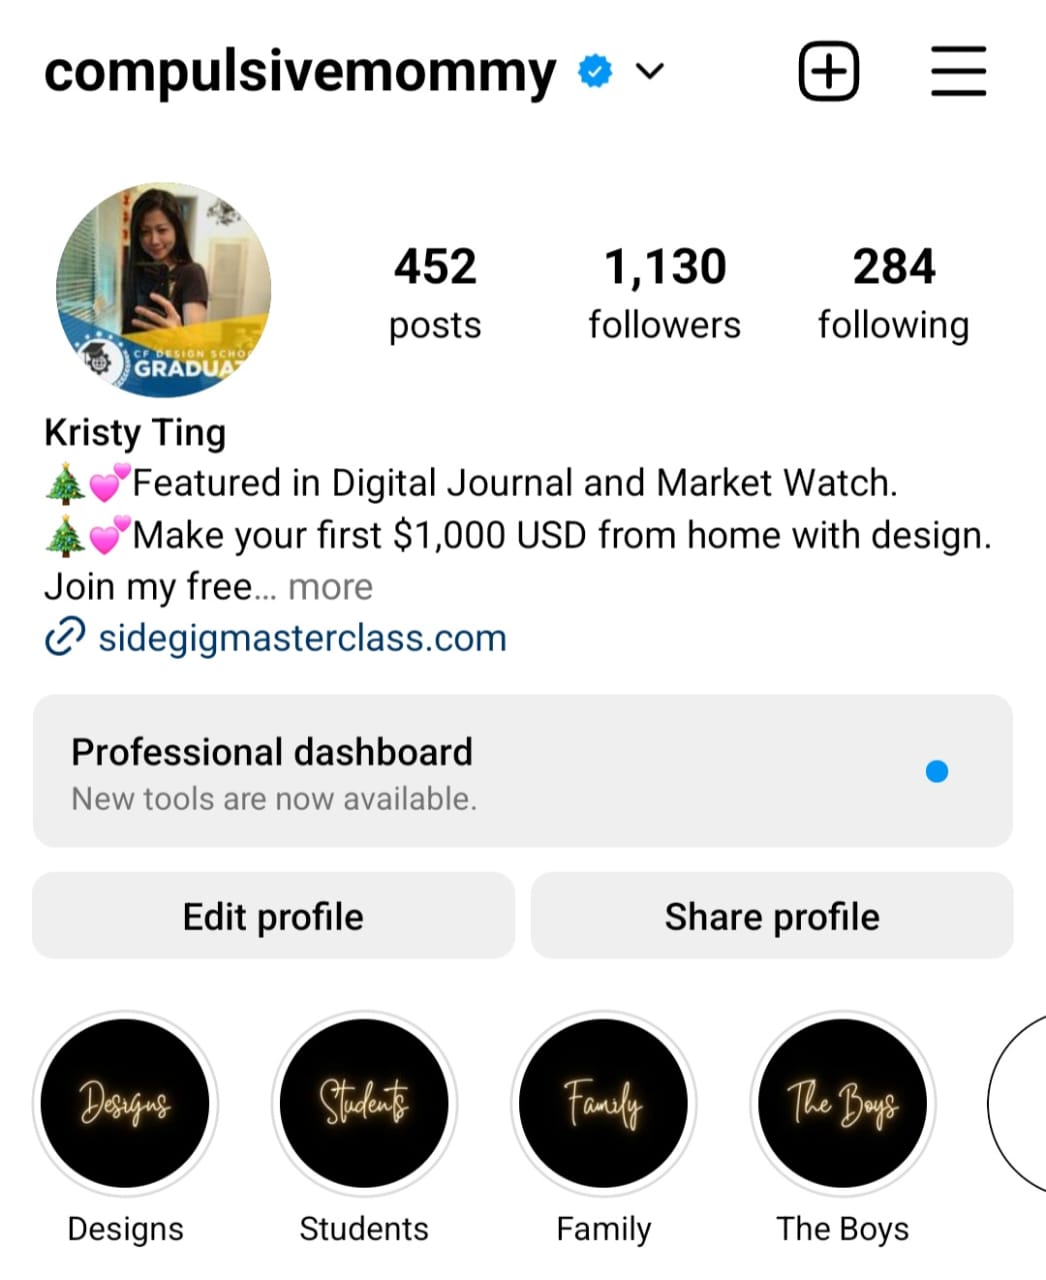 Kristy Ting Instagram account using highlight covers